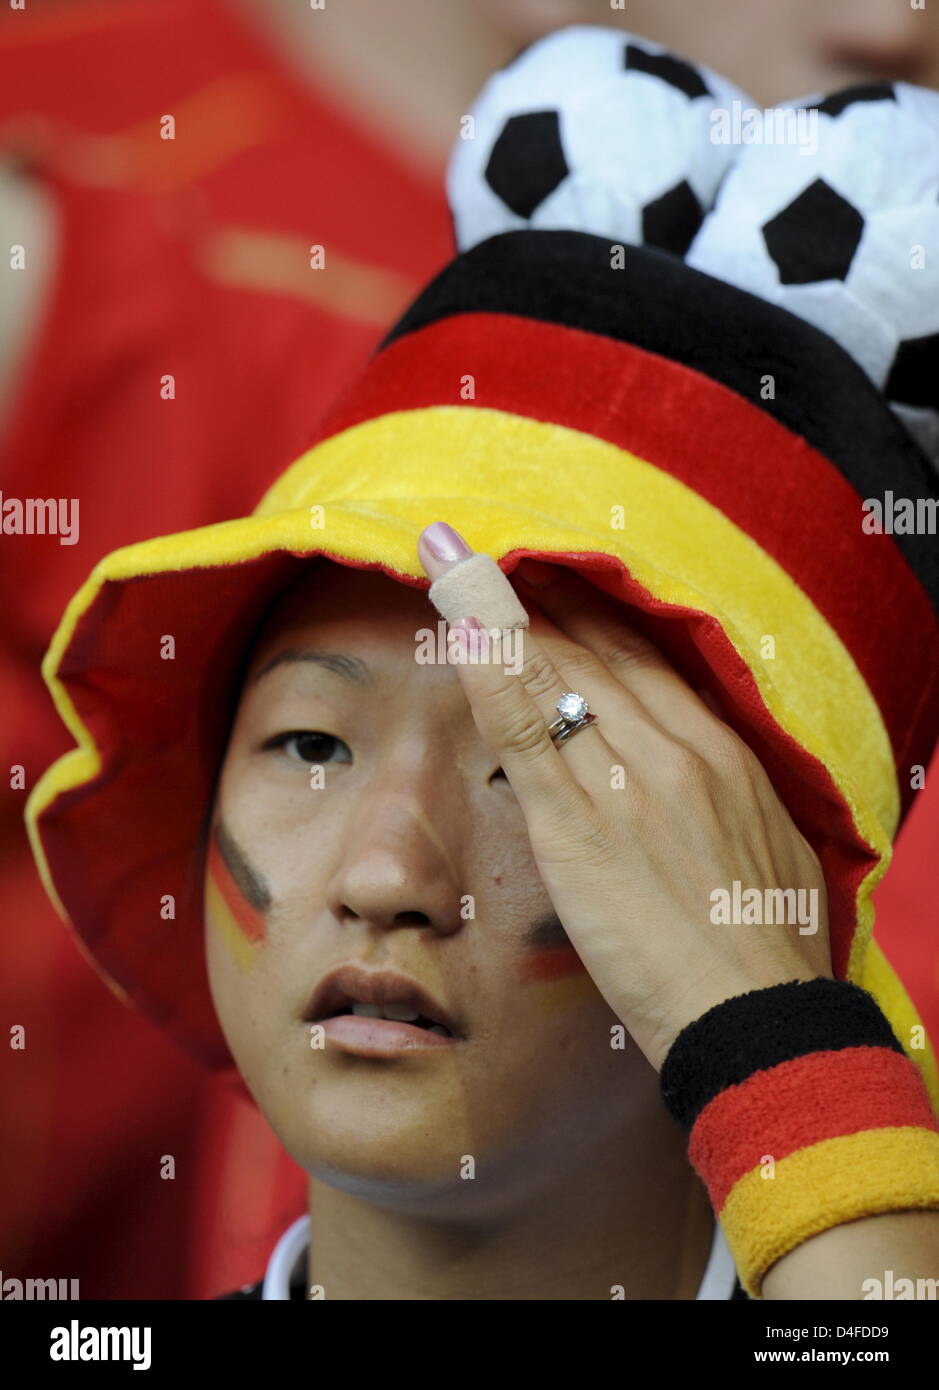 A German fan watches the UEFA EURO 2008 final match between Germany and Spain at the Ernst Happel stadium in Vienna, Austria, 29 June 2008. Photo: Peter Kneffel dpa +++###dpa###+++ Stock Photo